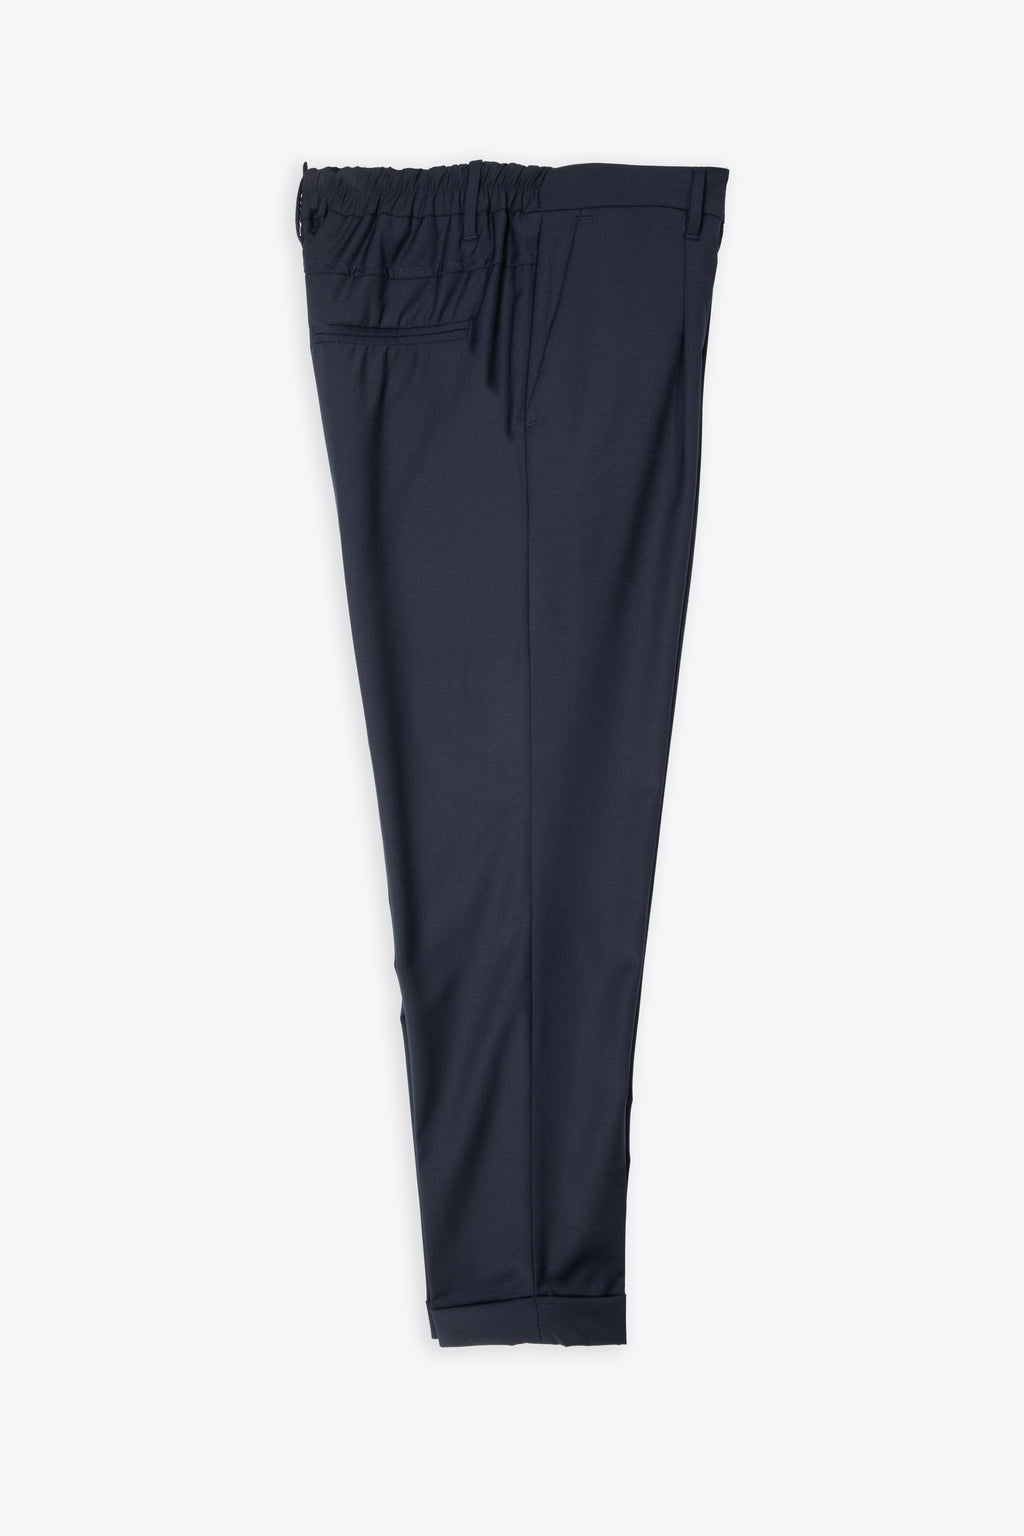 alt-image__Navy-blue-wool-tailored-pant-with-front-pleat---Stokholm